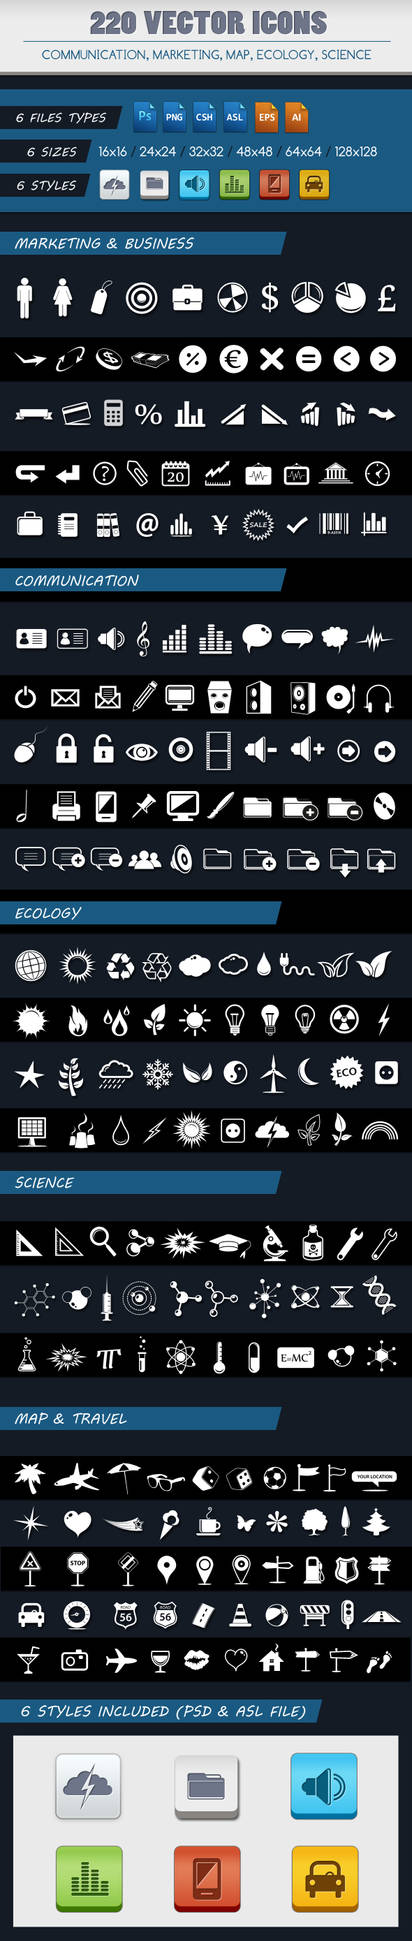 PACK OF 220 VECTOR ICONS OF 5 CATEGORIES